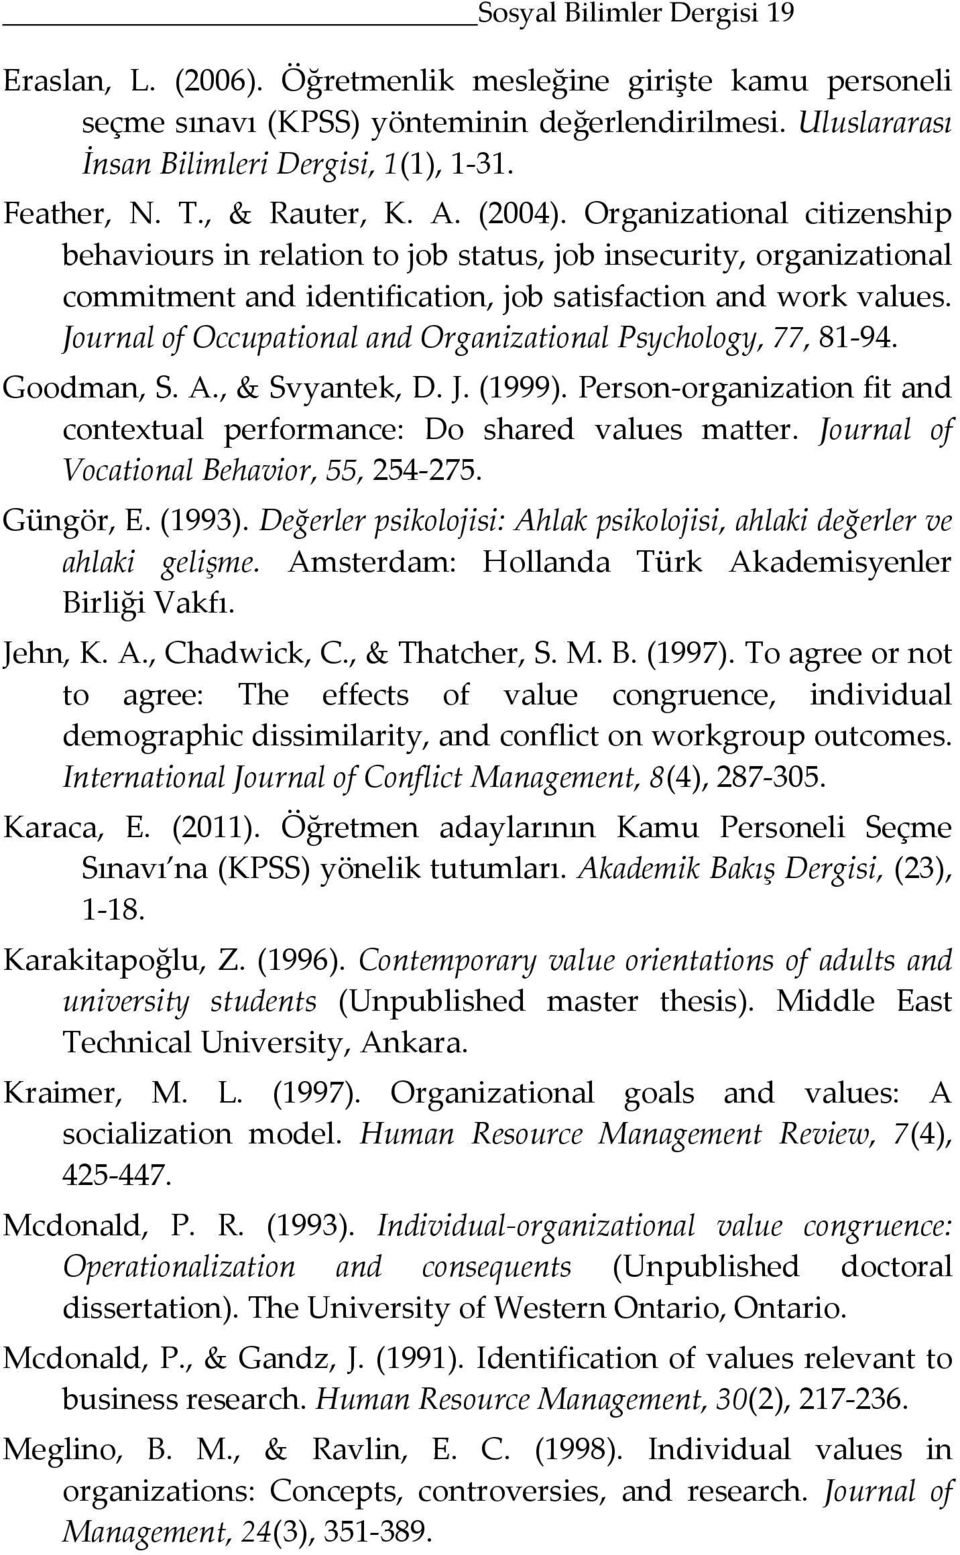 Journal of Occupational and Organizational Psychology, 77, 81-94. Goodman, S. A., & Svyantek, D. J. (1999). Person-organization fit and contextual performance: Do shared values matter.